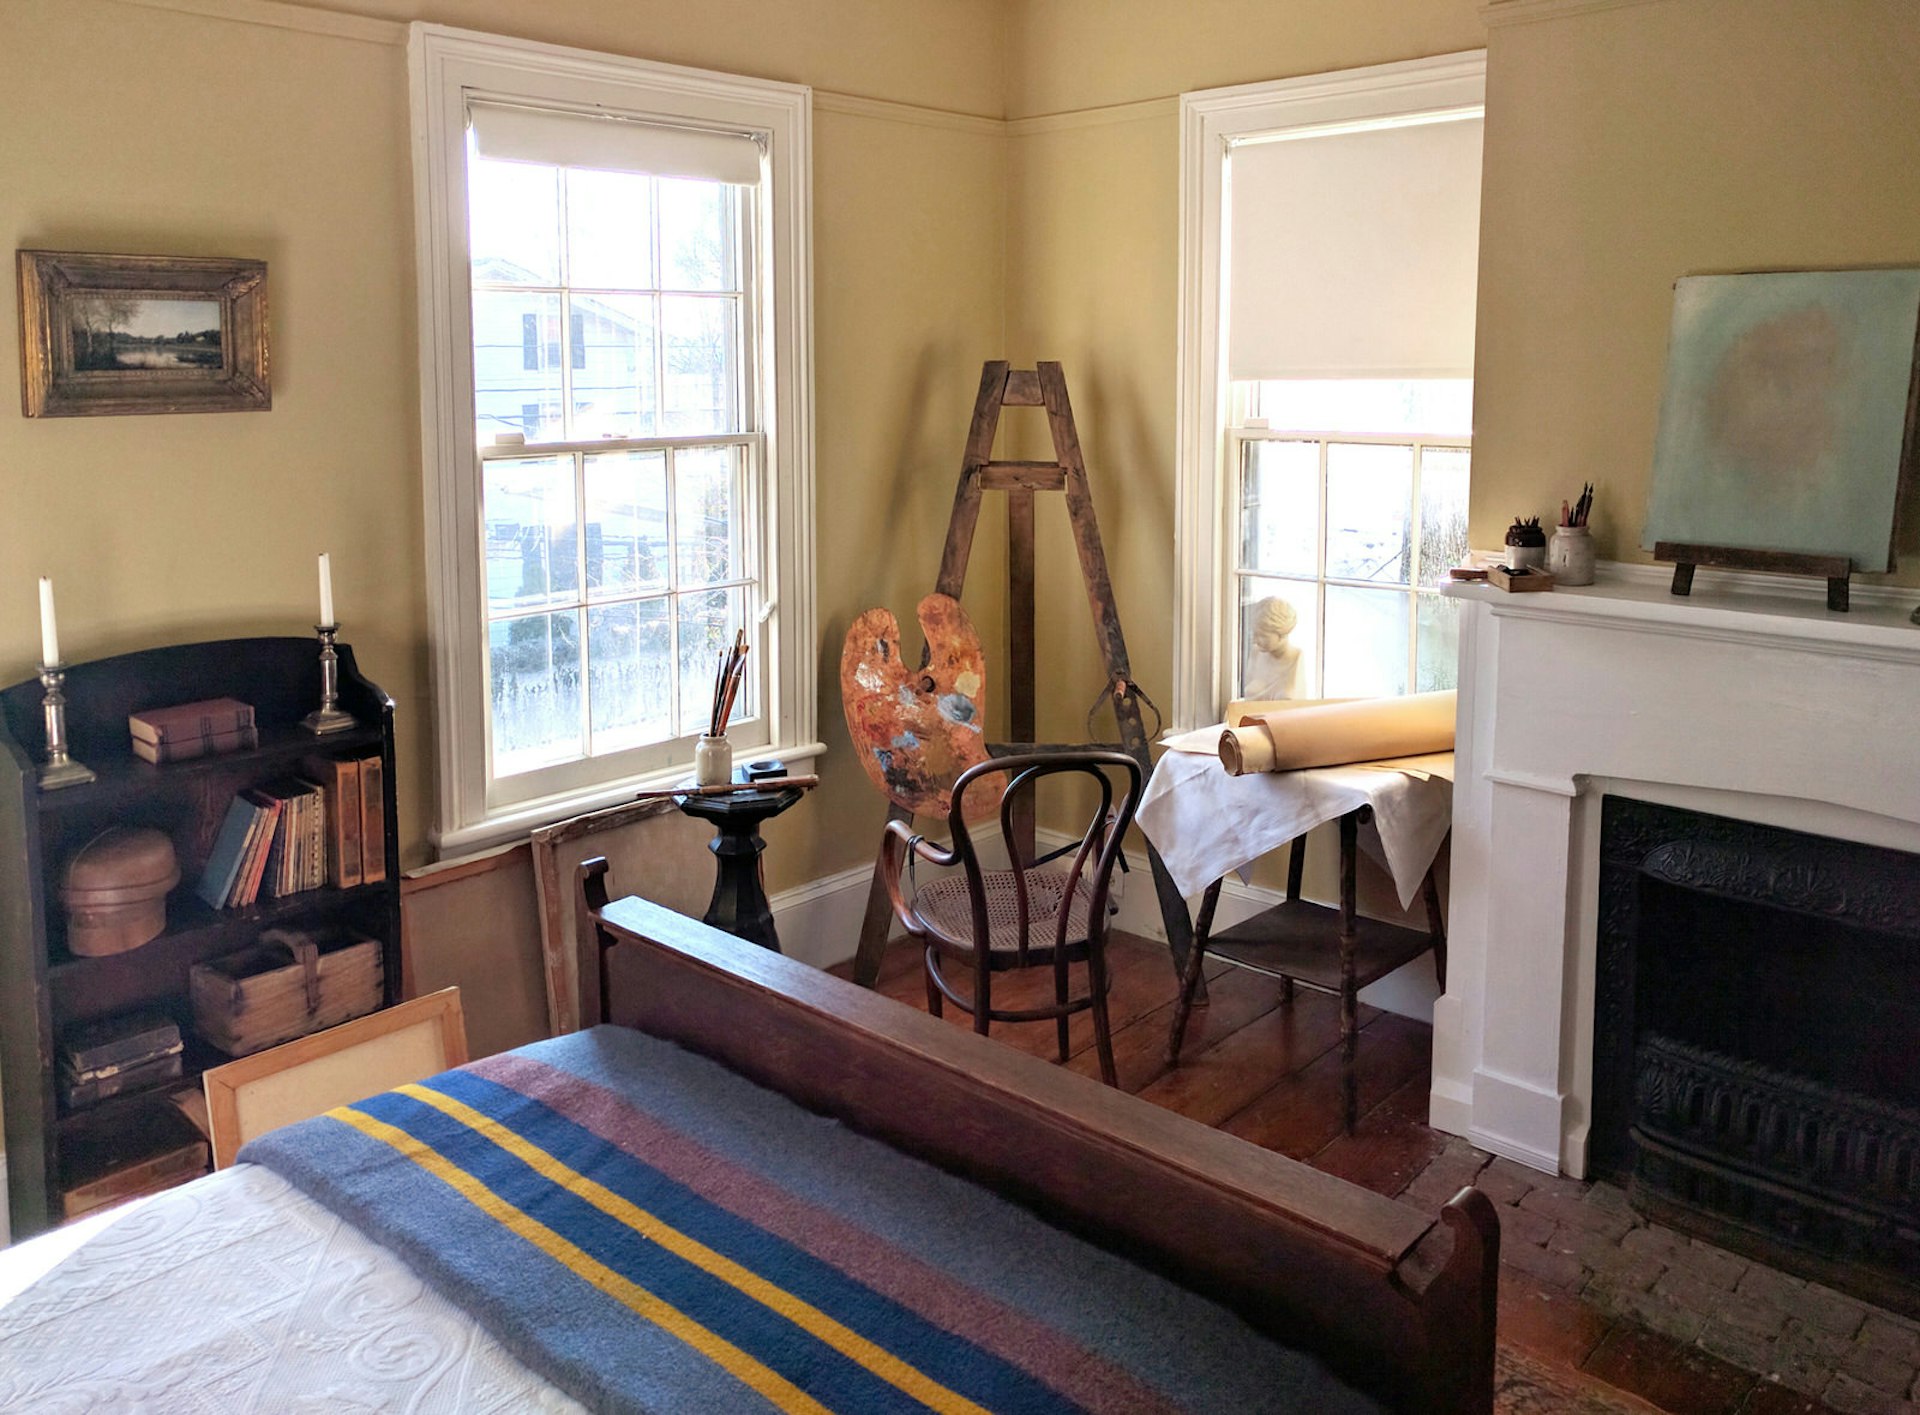 A sunny, yellow-walled room with a trim, well-made wooden bed and an unlit fireplace. A painter's easel is in the corner of the room. The room is brightly lit through two large windows. It's the bedroom at Edward Hopper House Museum in Nyack, New York